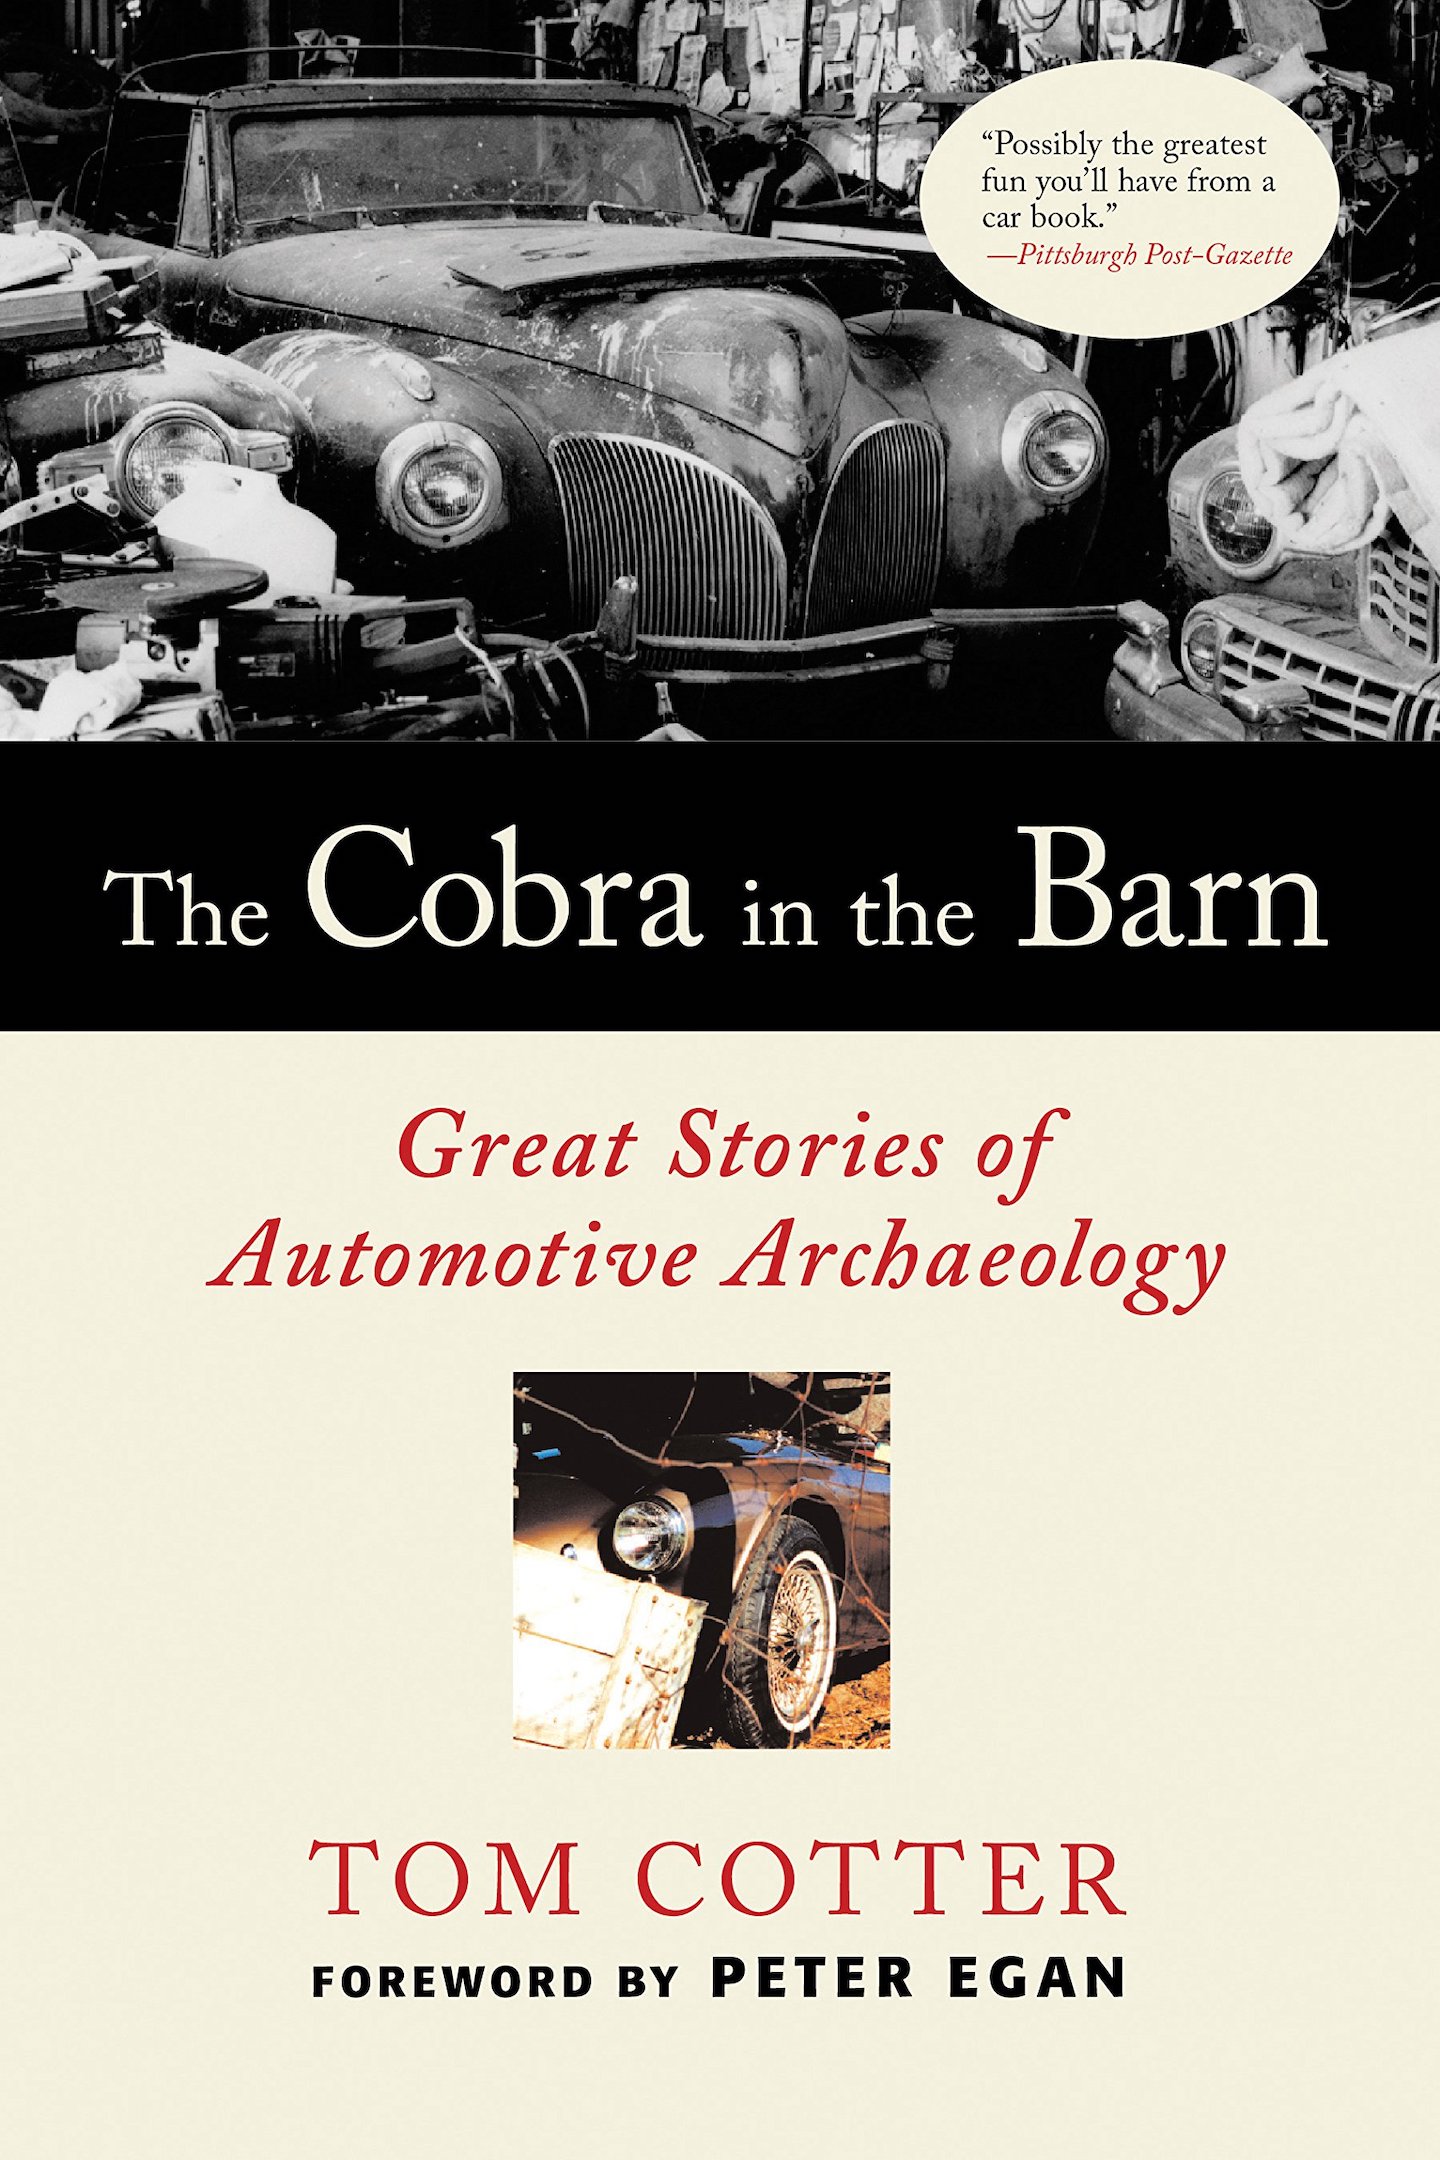 The Cobra in the Barn: Great Stories of Automotive Archaeology